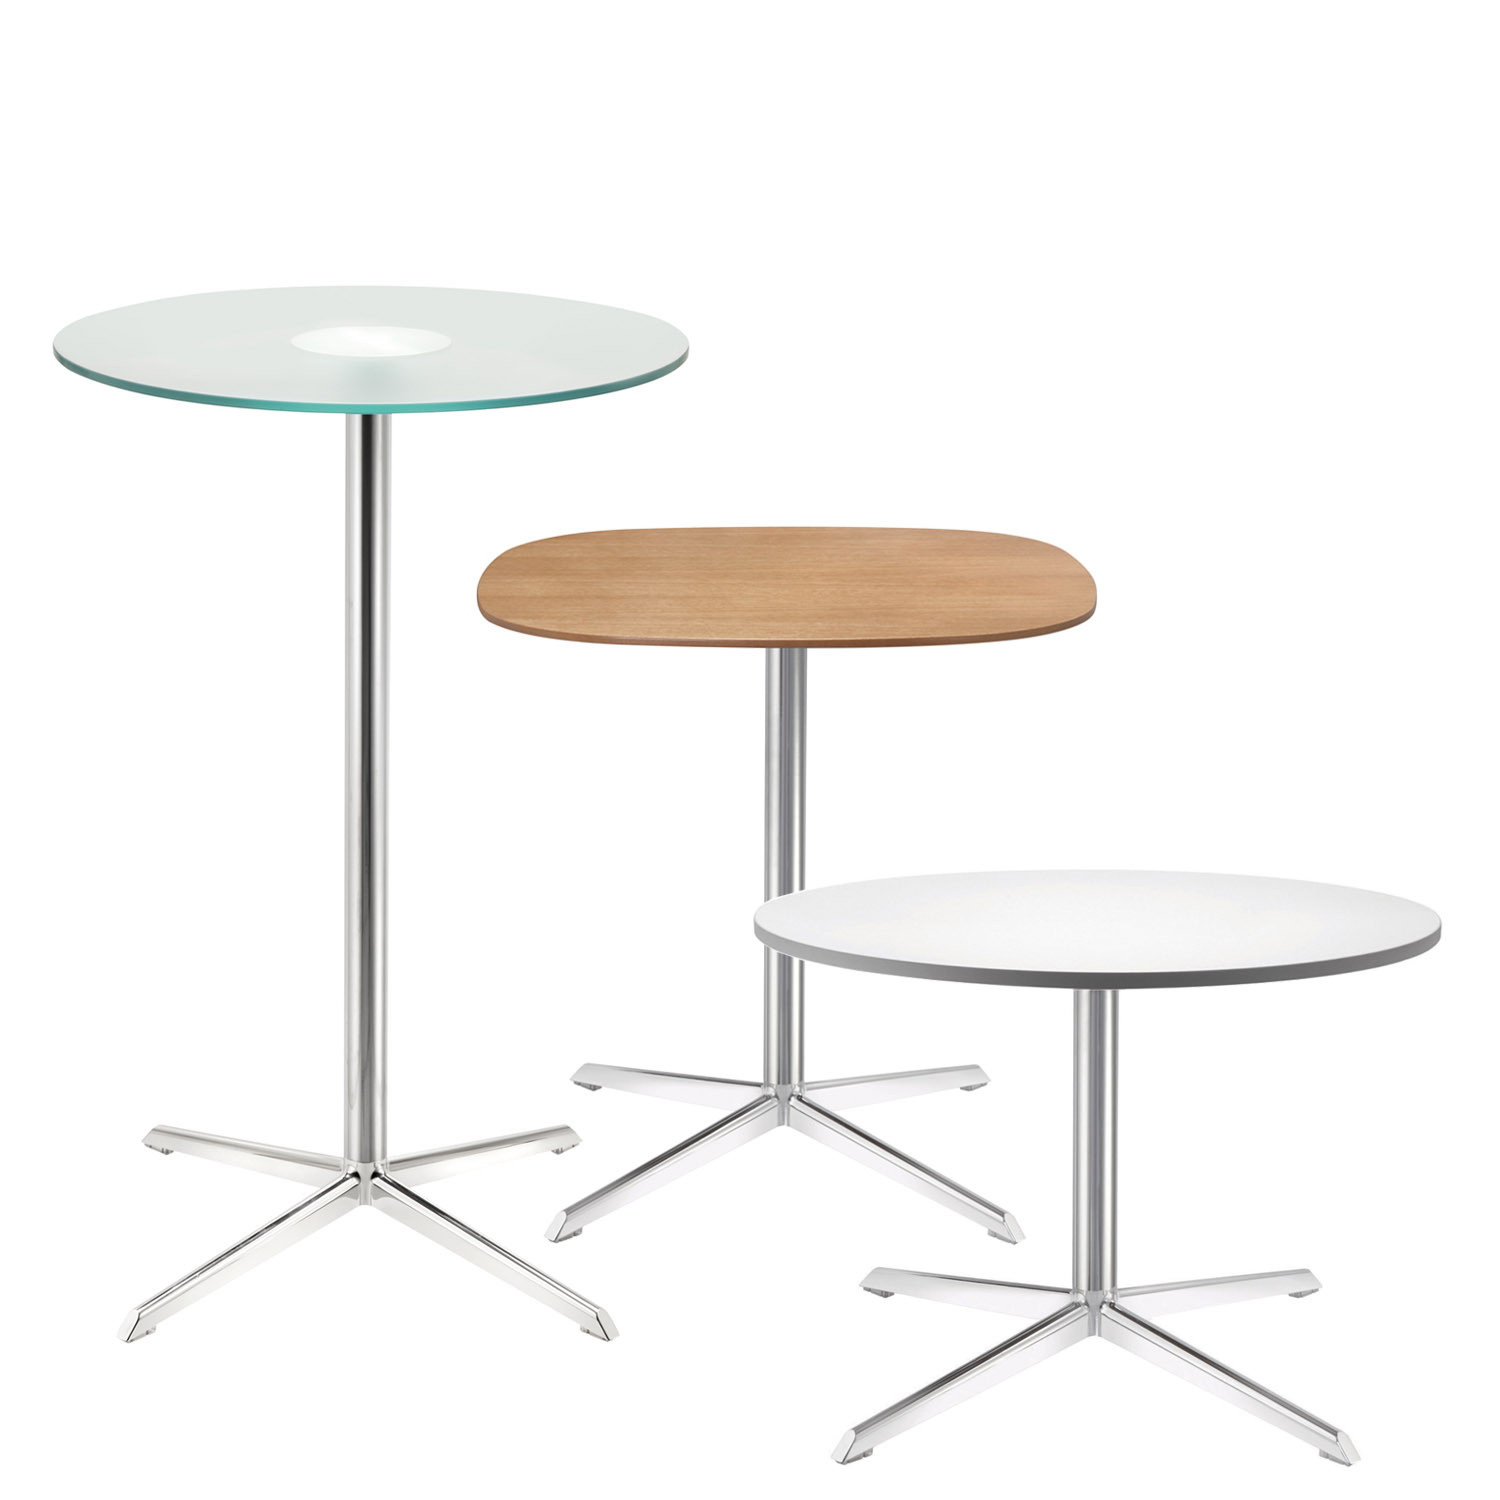 Connection Gloss Tables Range